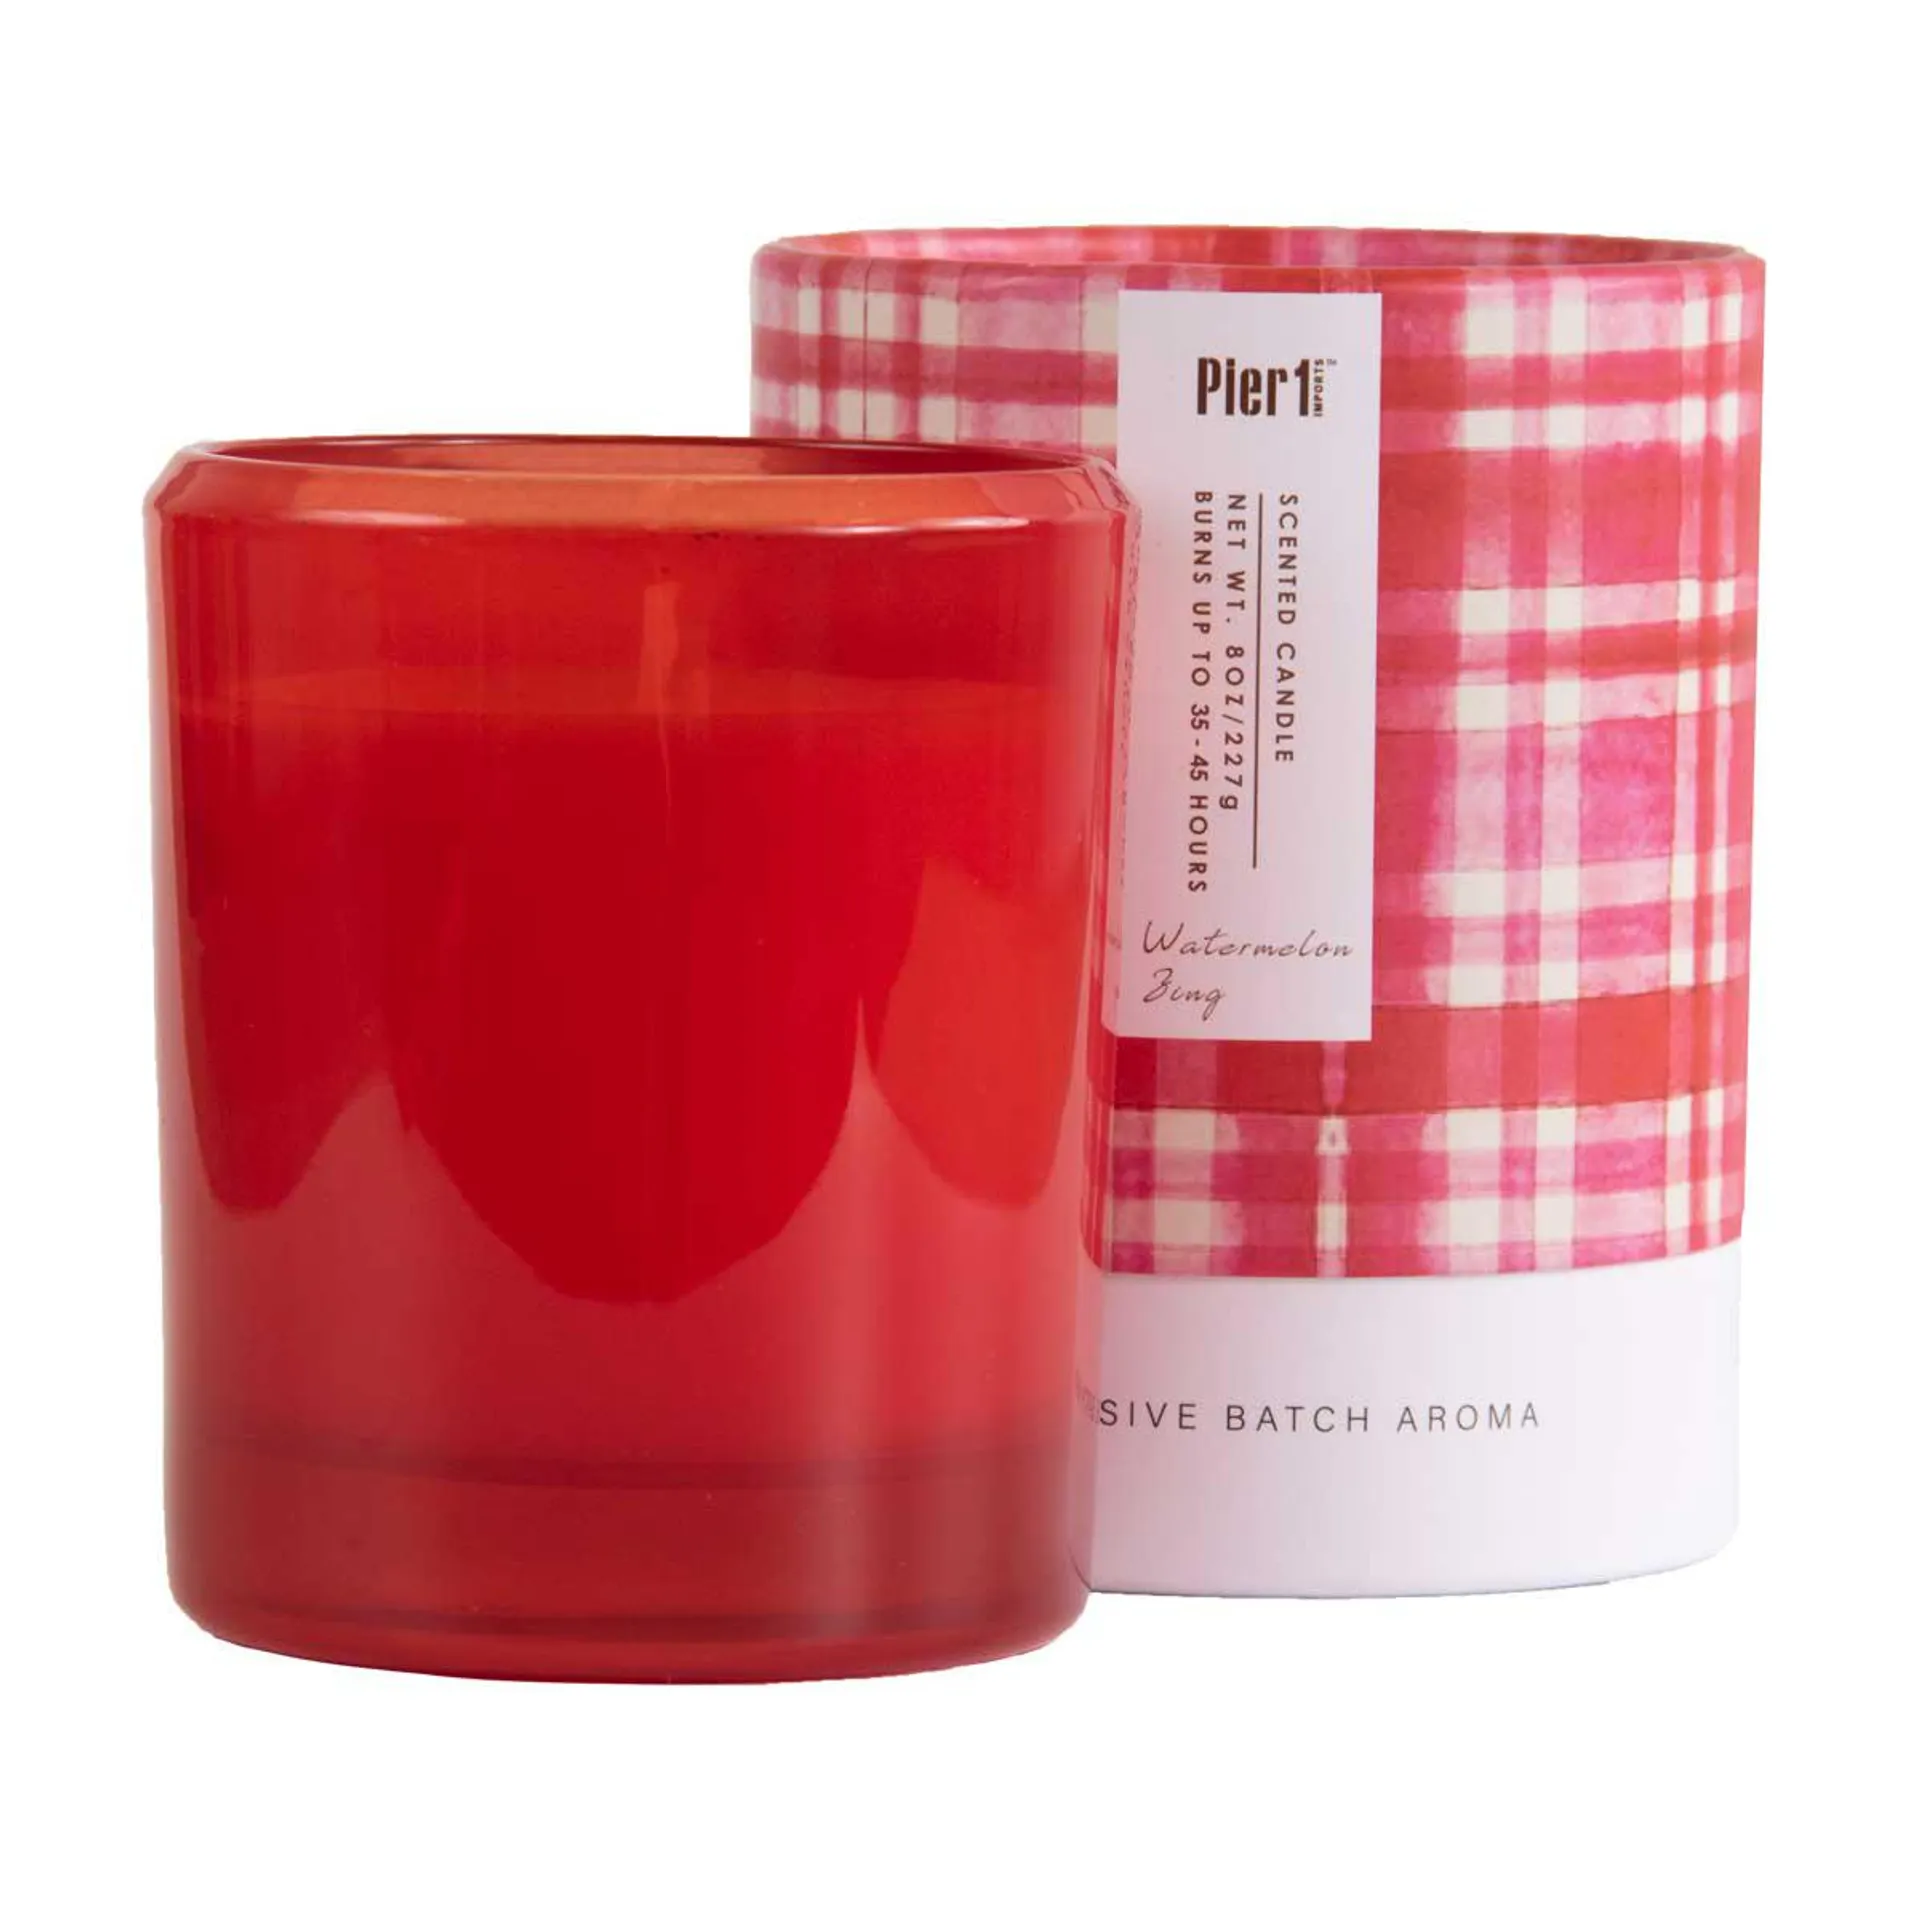 Pier 1 Watermelon Zing 8oz Boxed Soy Candle